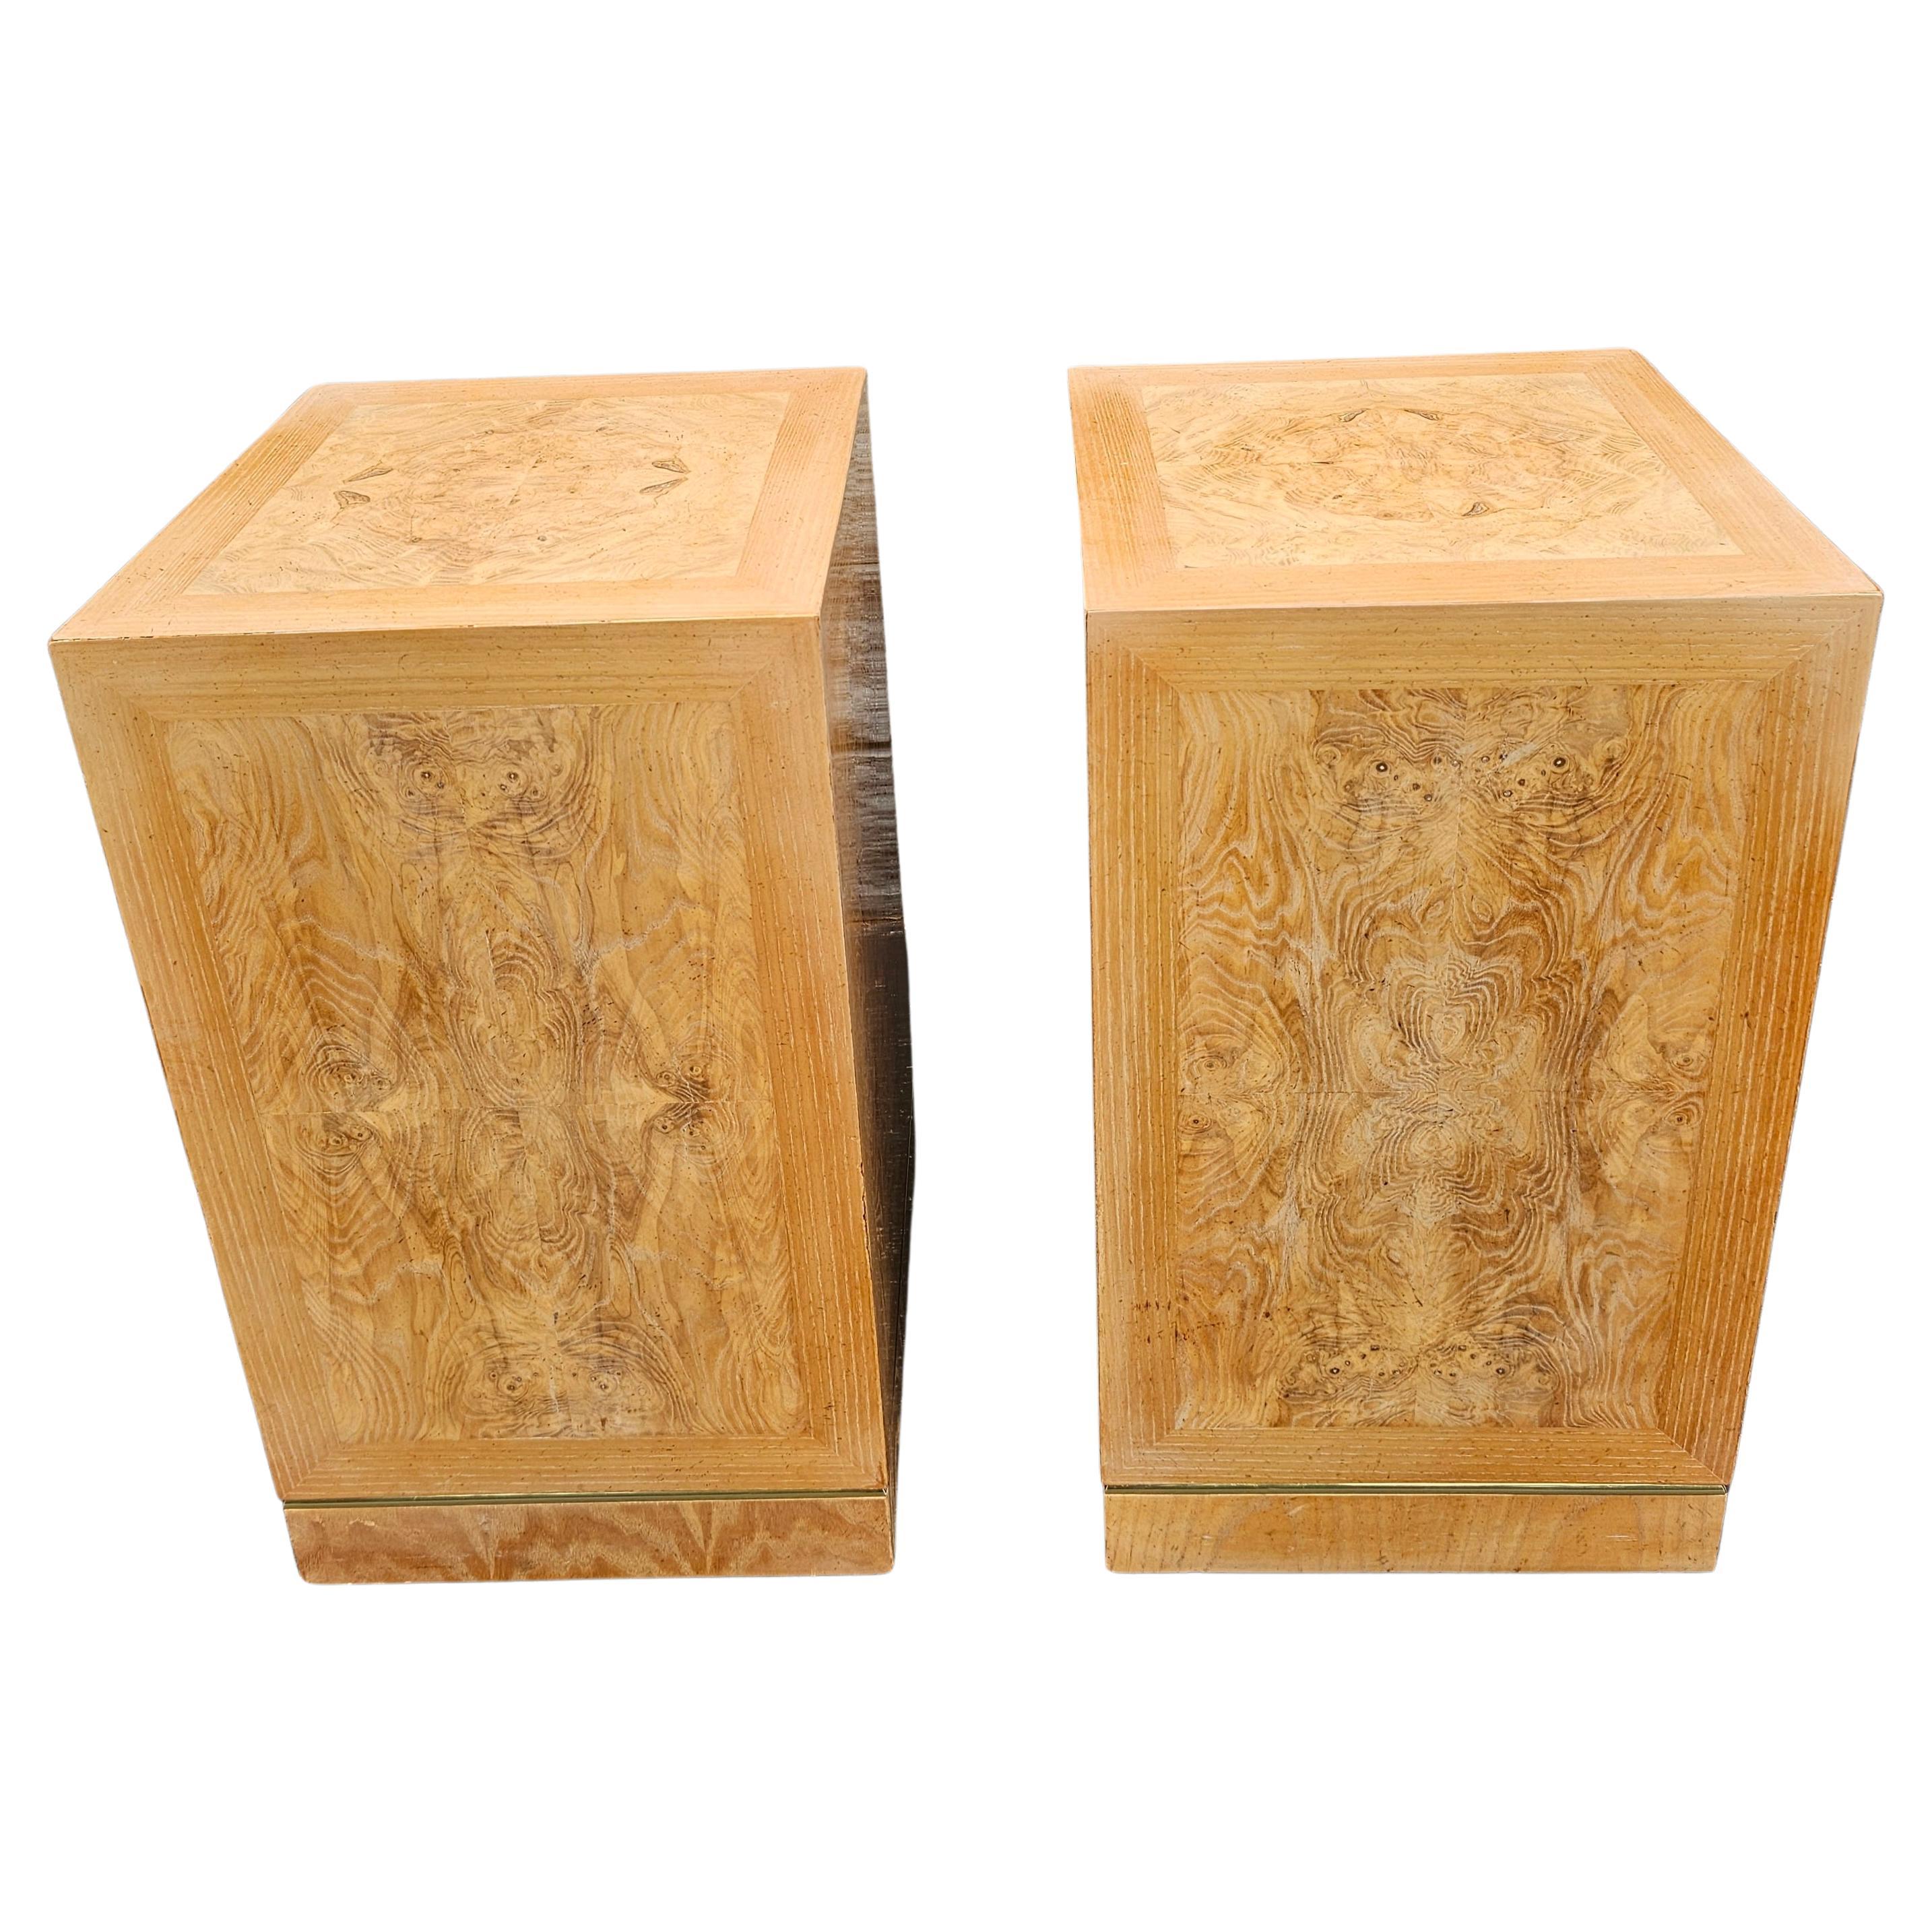 Pair Of mid 20th Century Connoisseur By Heritage banded and Burl Pedestals / Columns. Measures 16